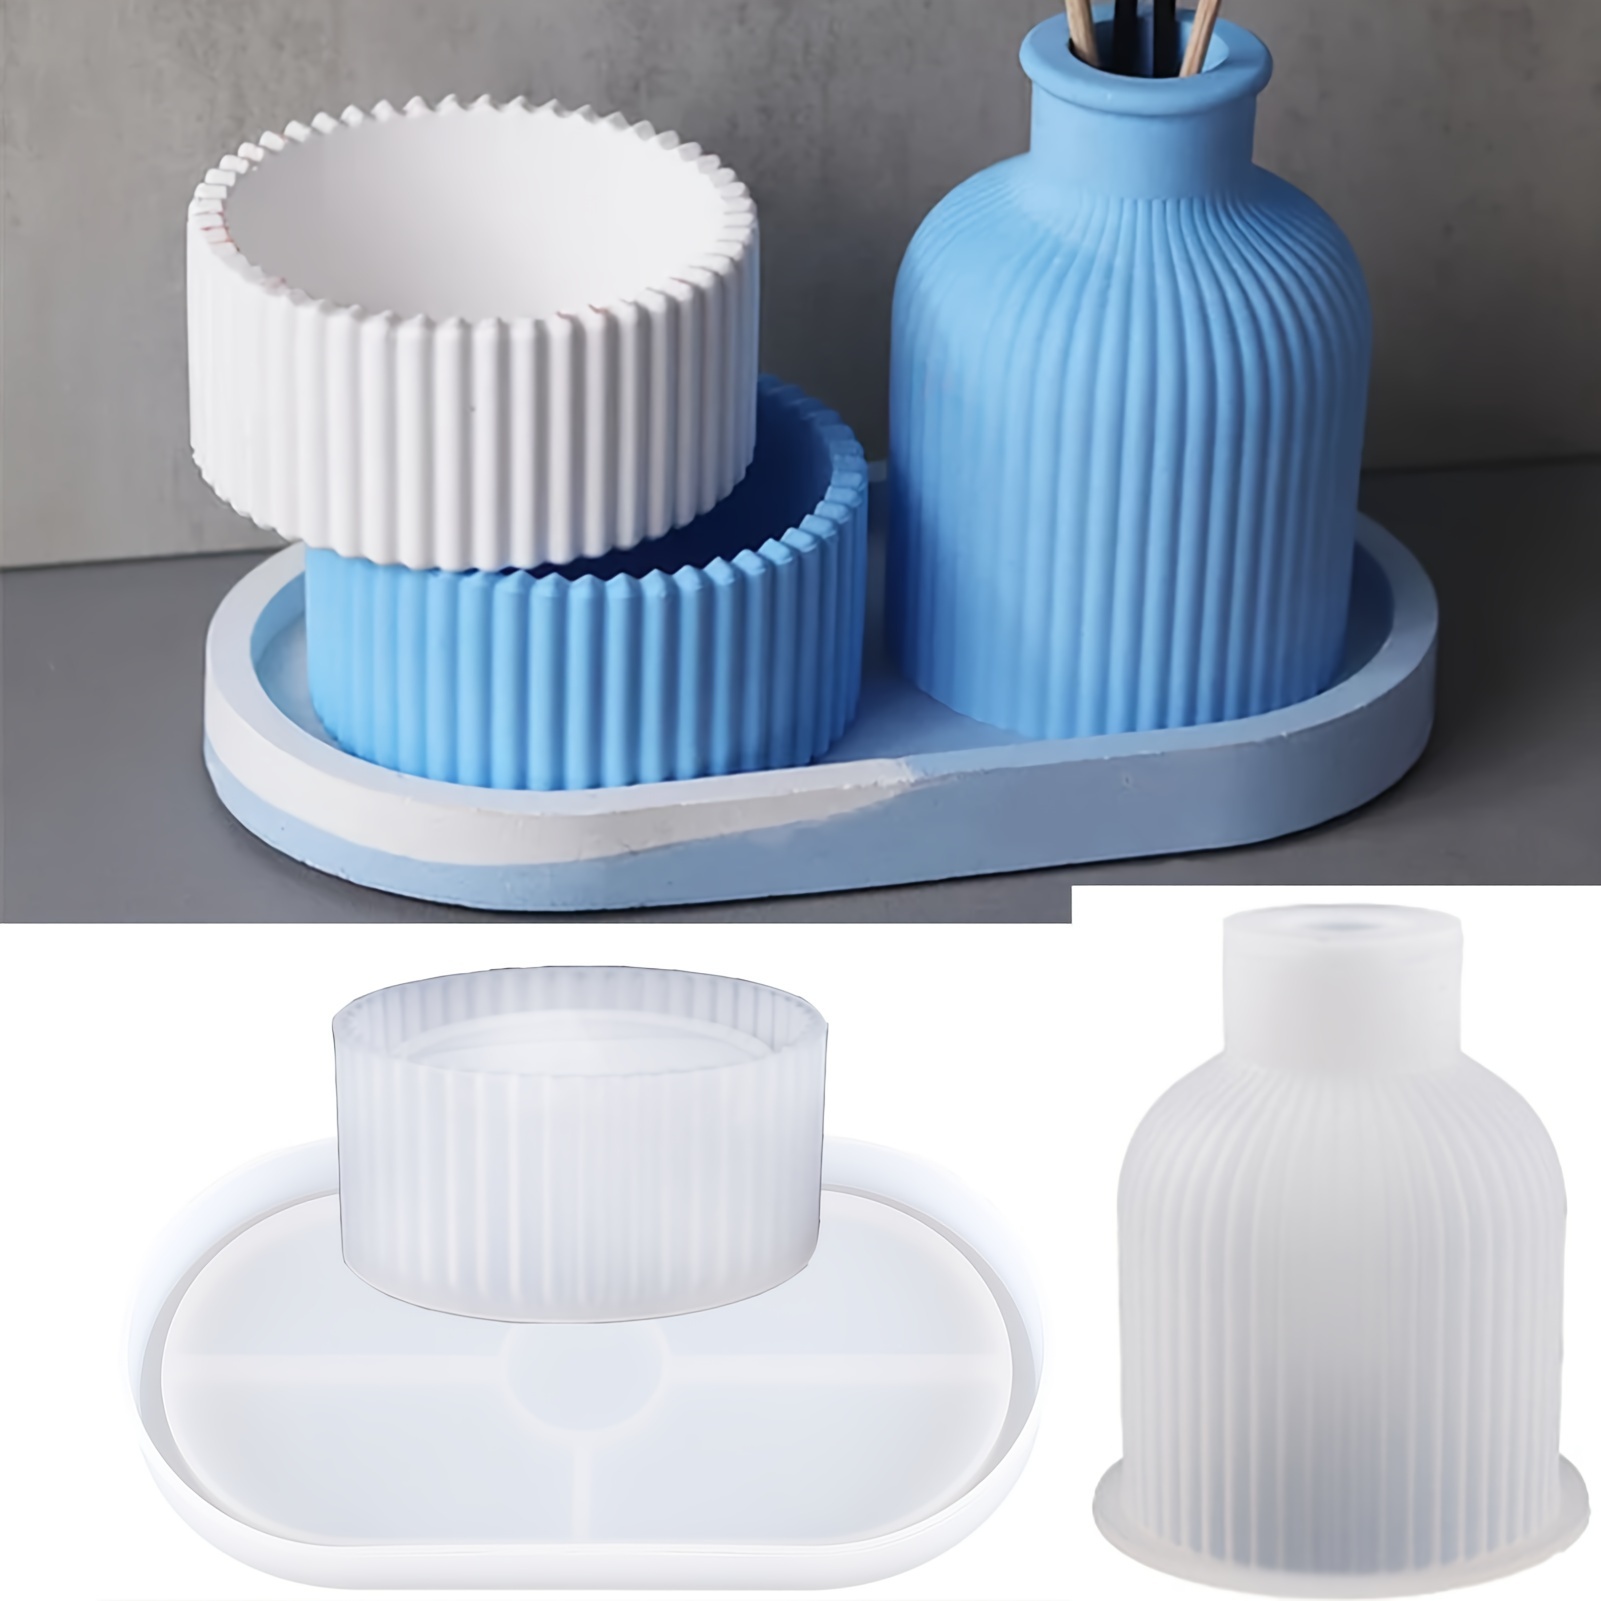 

3pcs/set Epoxy Resin Round Candle Jar With Striped Plaster Flower Vase Pot Silicone Mold For Making Coasters, Jewelry Storage Jar For Home Decoration